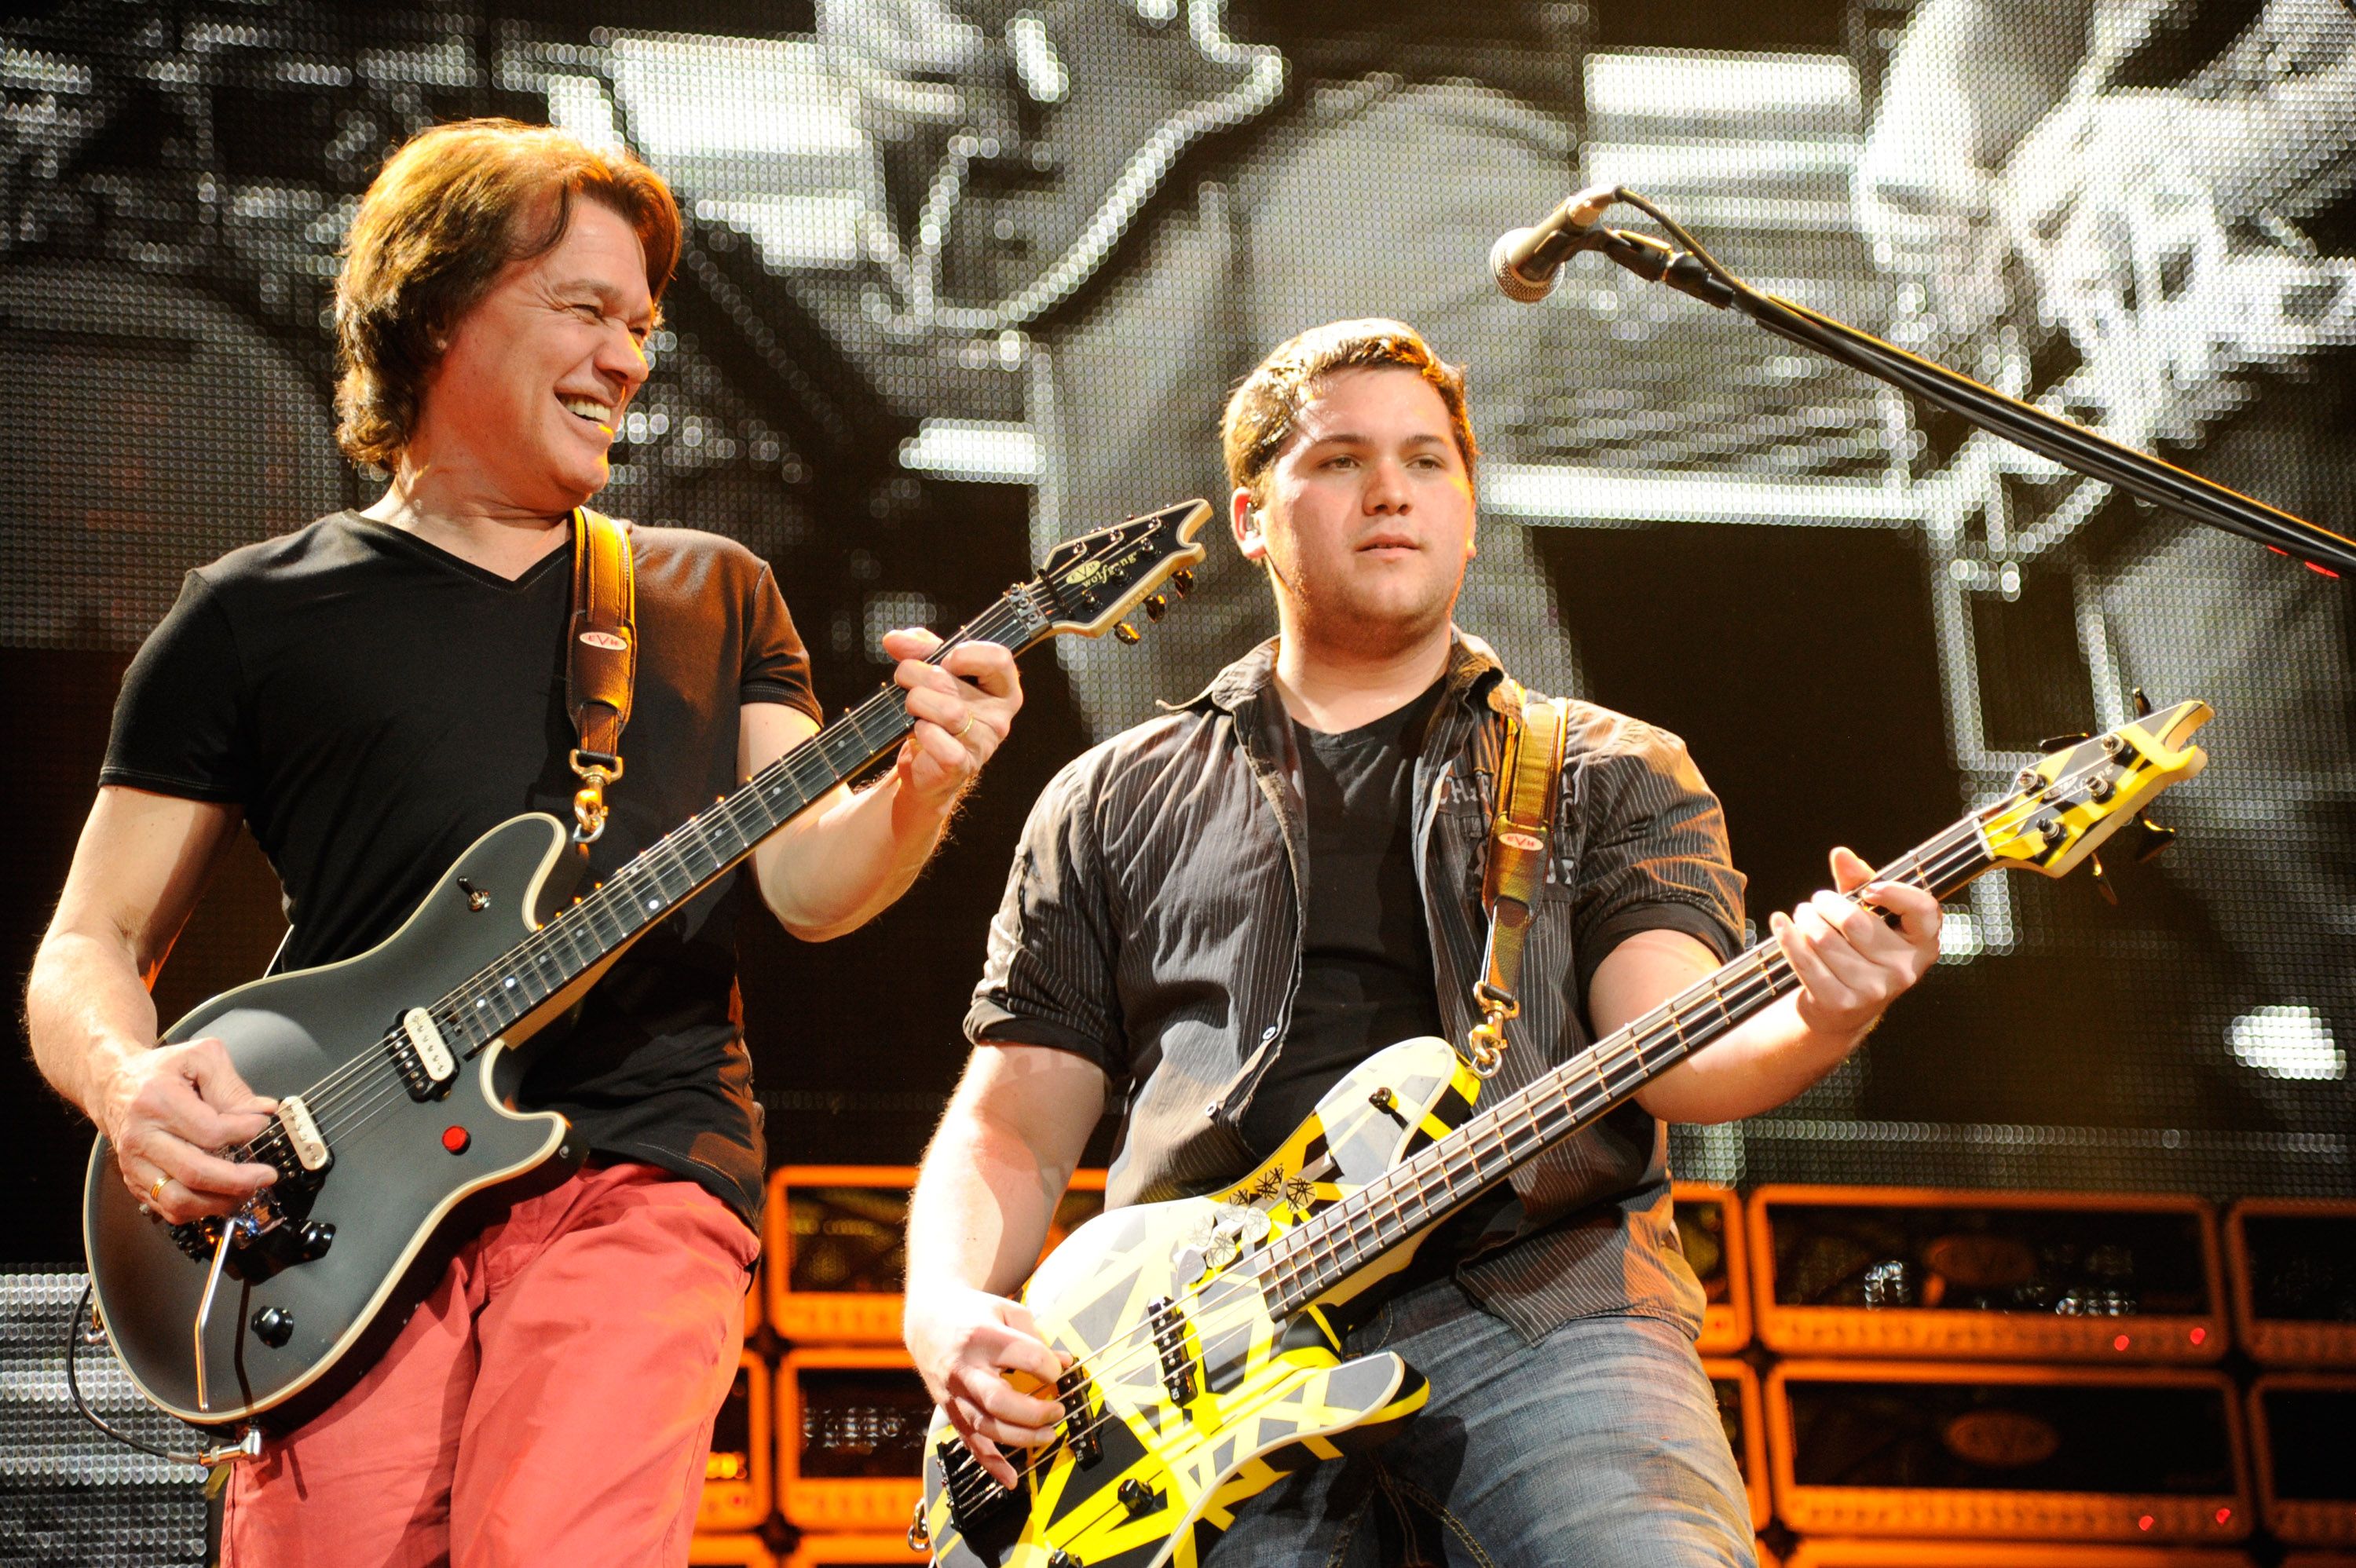 Eddie Van Halen and Wolfgang Van Halen of Van Halen perform during "A Different Kind of Truth" tour at Madison Square Garden on February 28, 2012. | Photo: Getty Images.